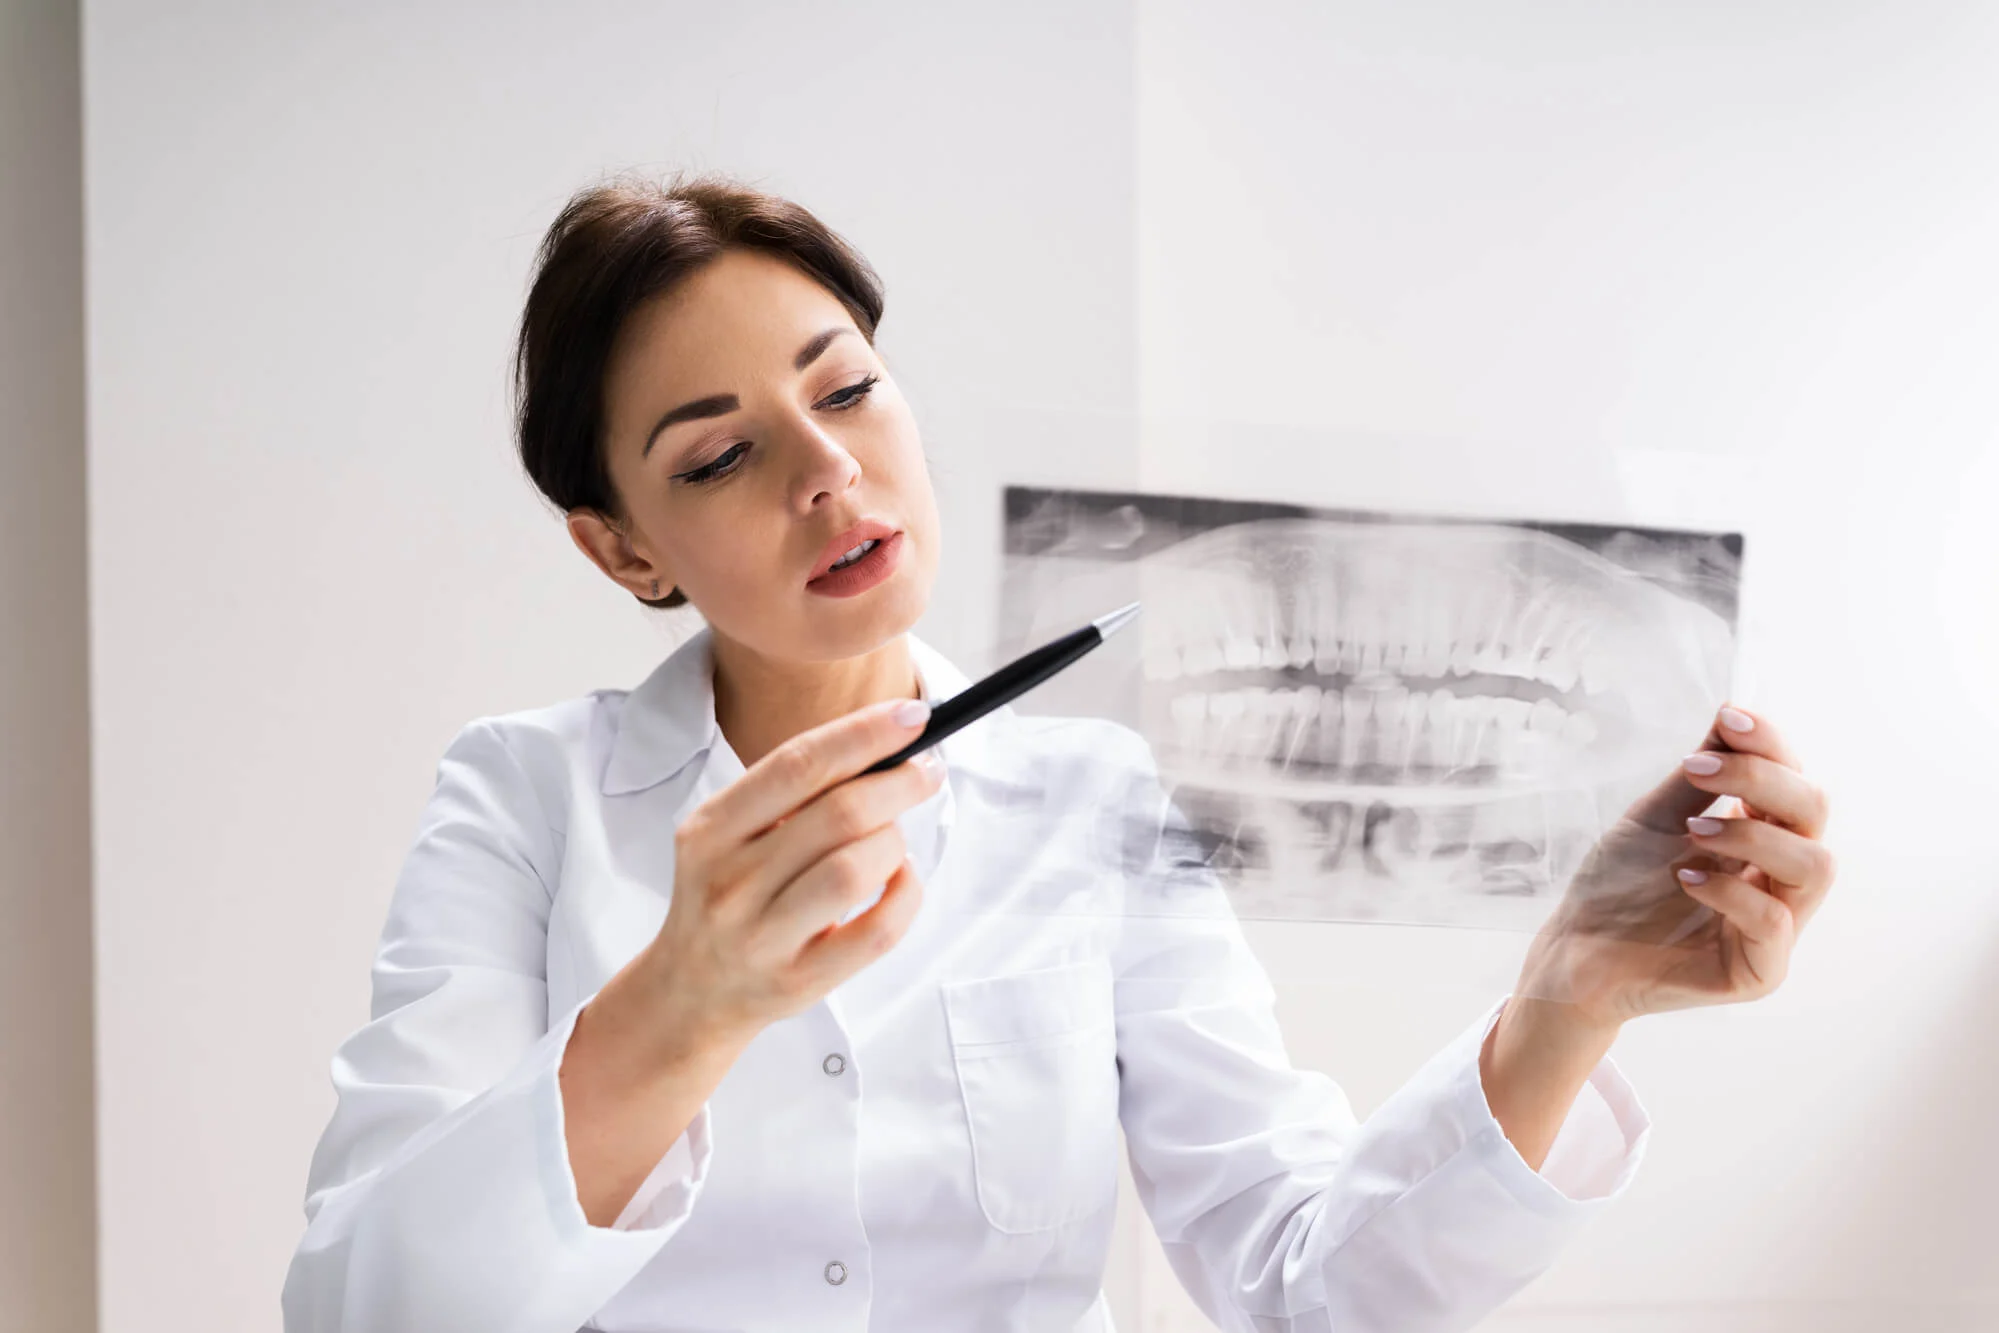 a dentist discussing Wisdom Teeth Removal in Las Vegas while holding an x-ray film